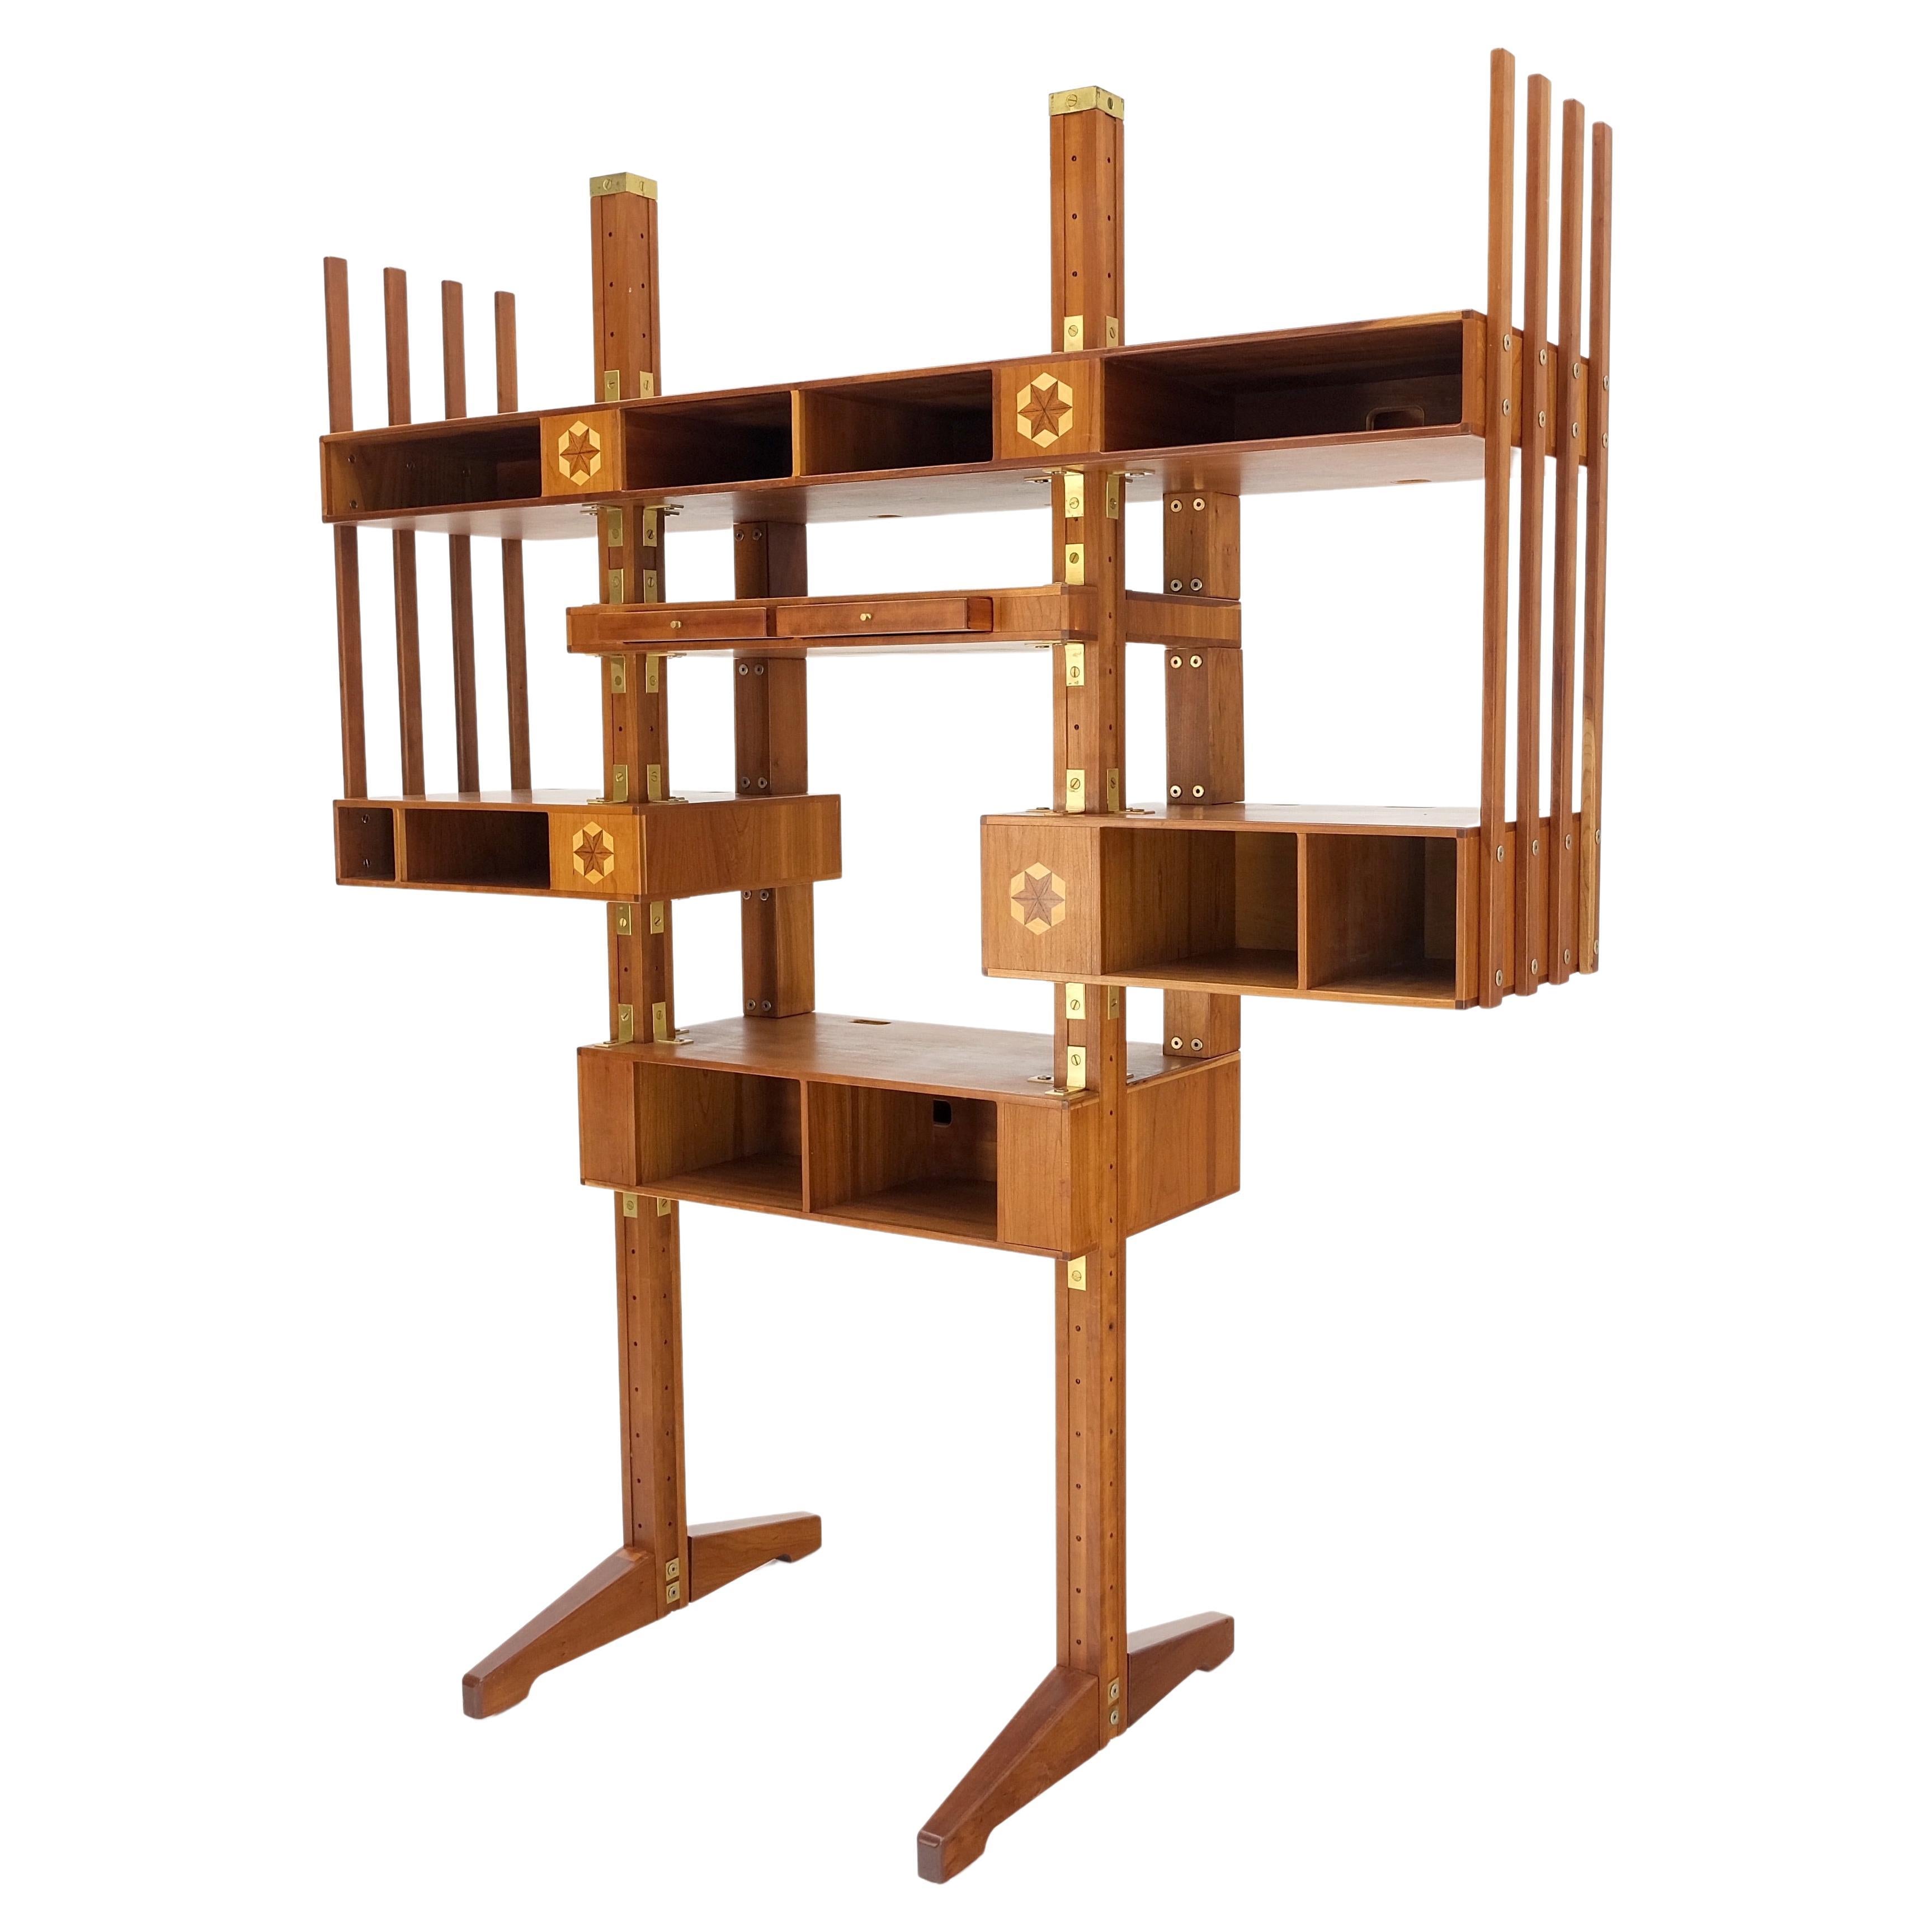 Custom Stereo Equipment Etagere Shelf W/ Sophisticated Concealed Chaise Way Mint For Sale